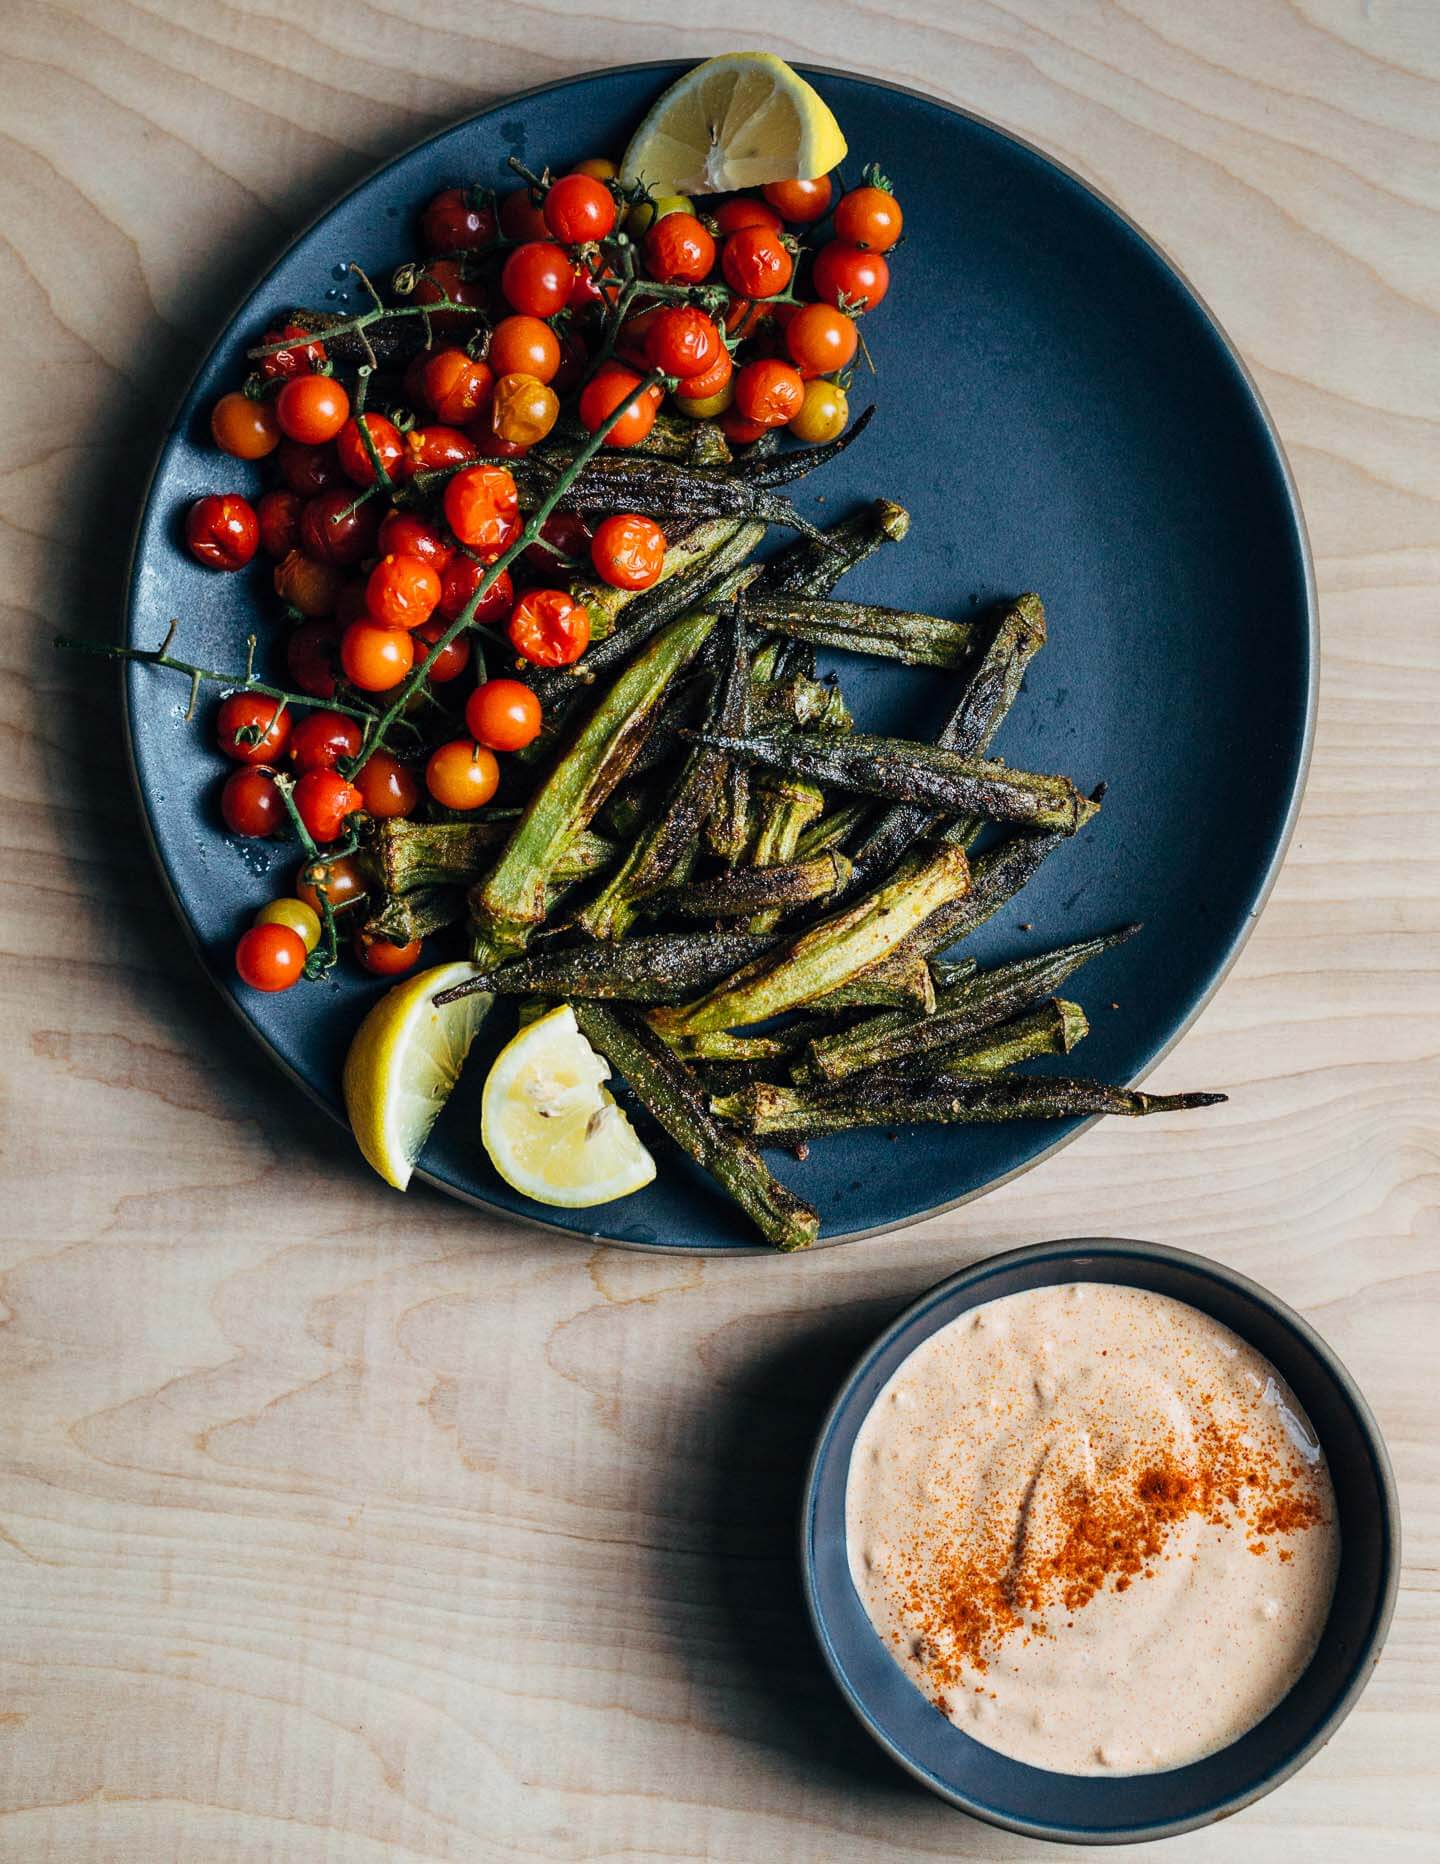 Crispy roasted okra and cherry tomato bunches are served alongside an irresistible (cheater) pimentón aioli.